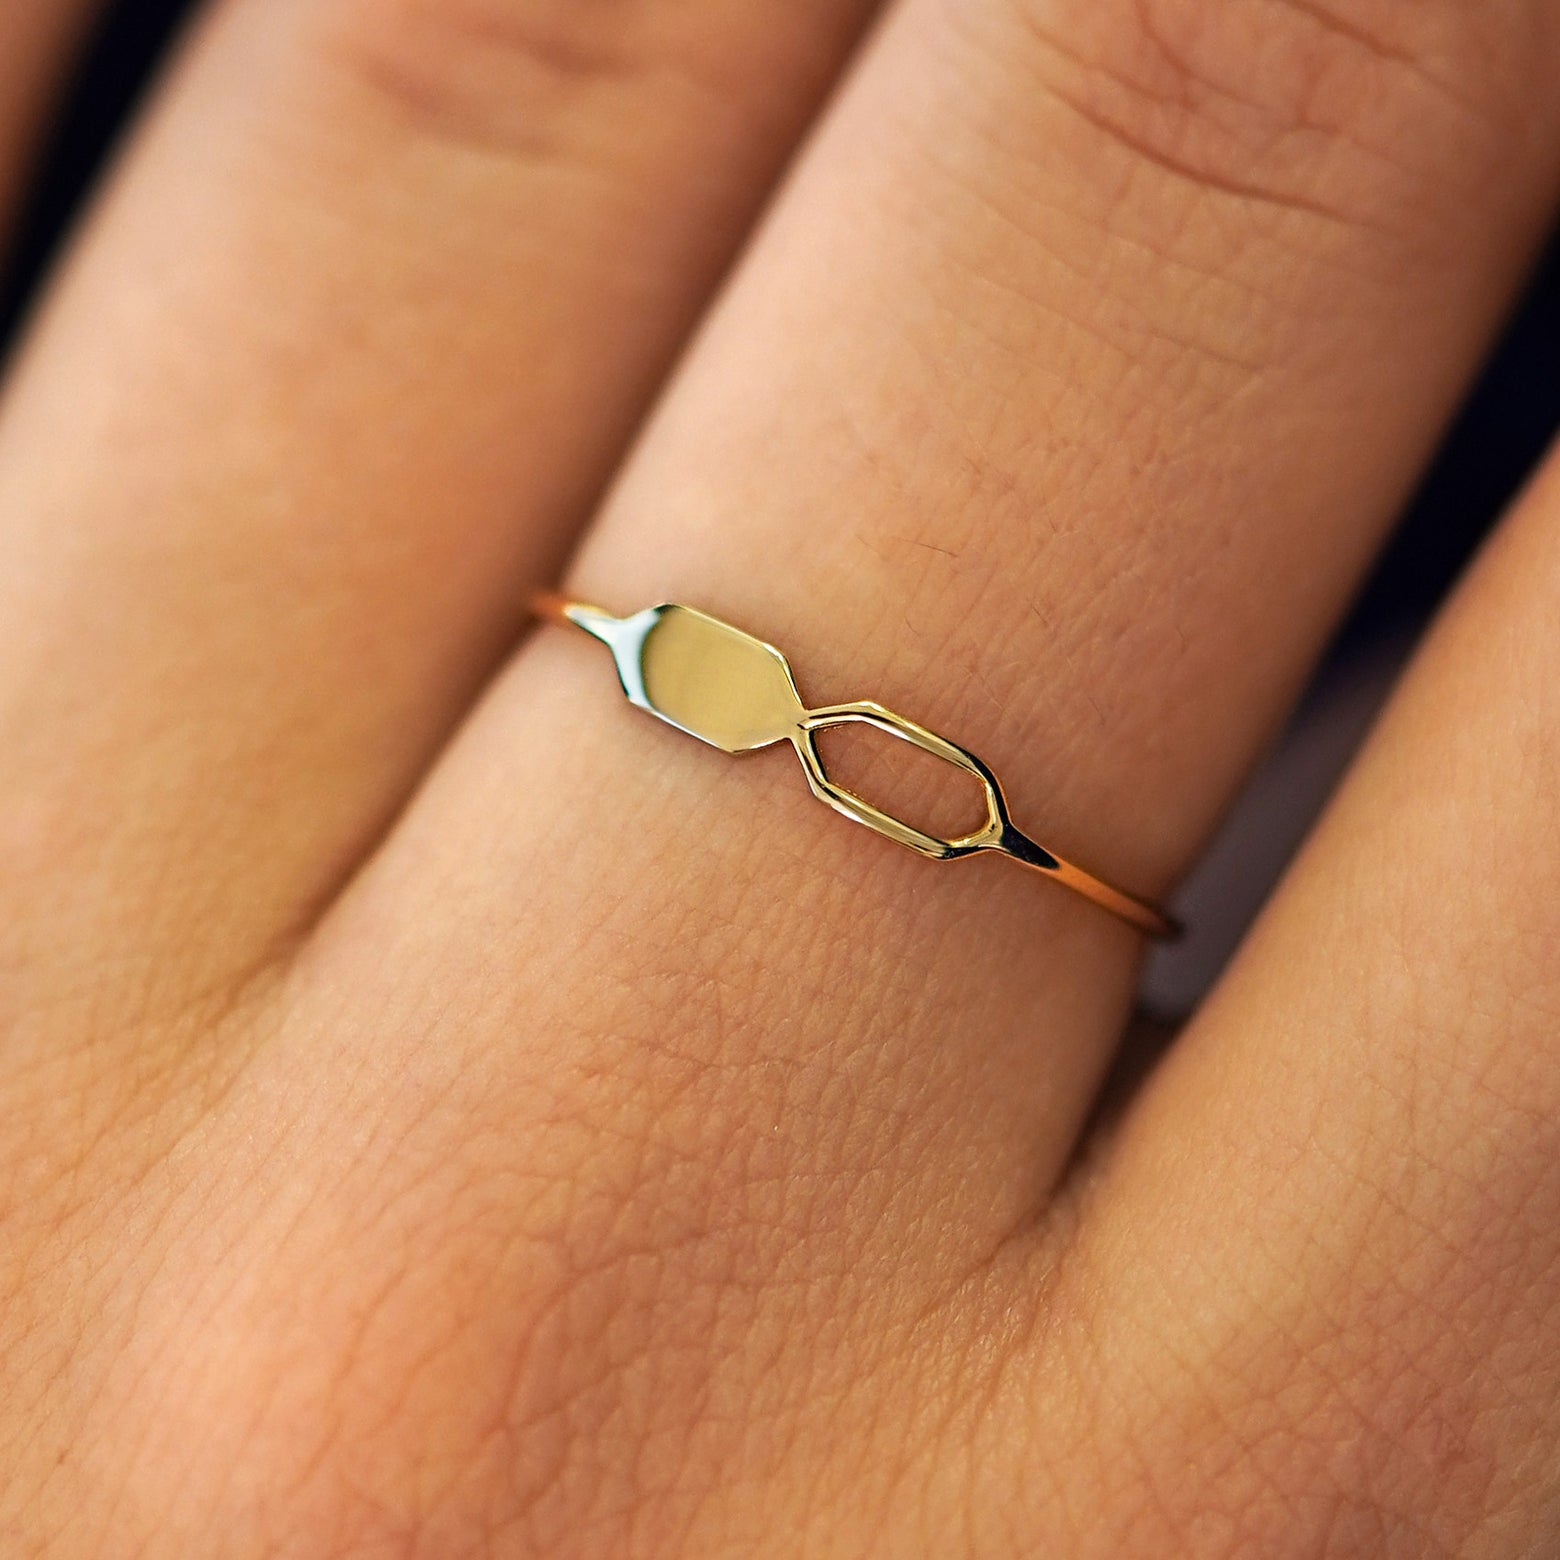 Close up view of a model's fingers wearing a 14k yellow gold Tanlah Ring